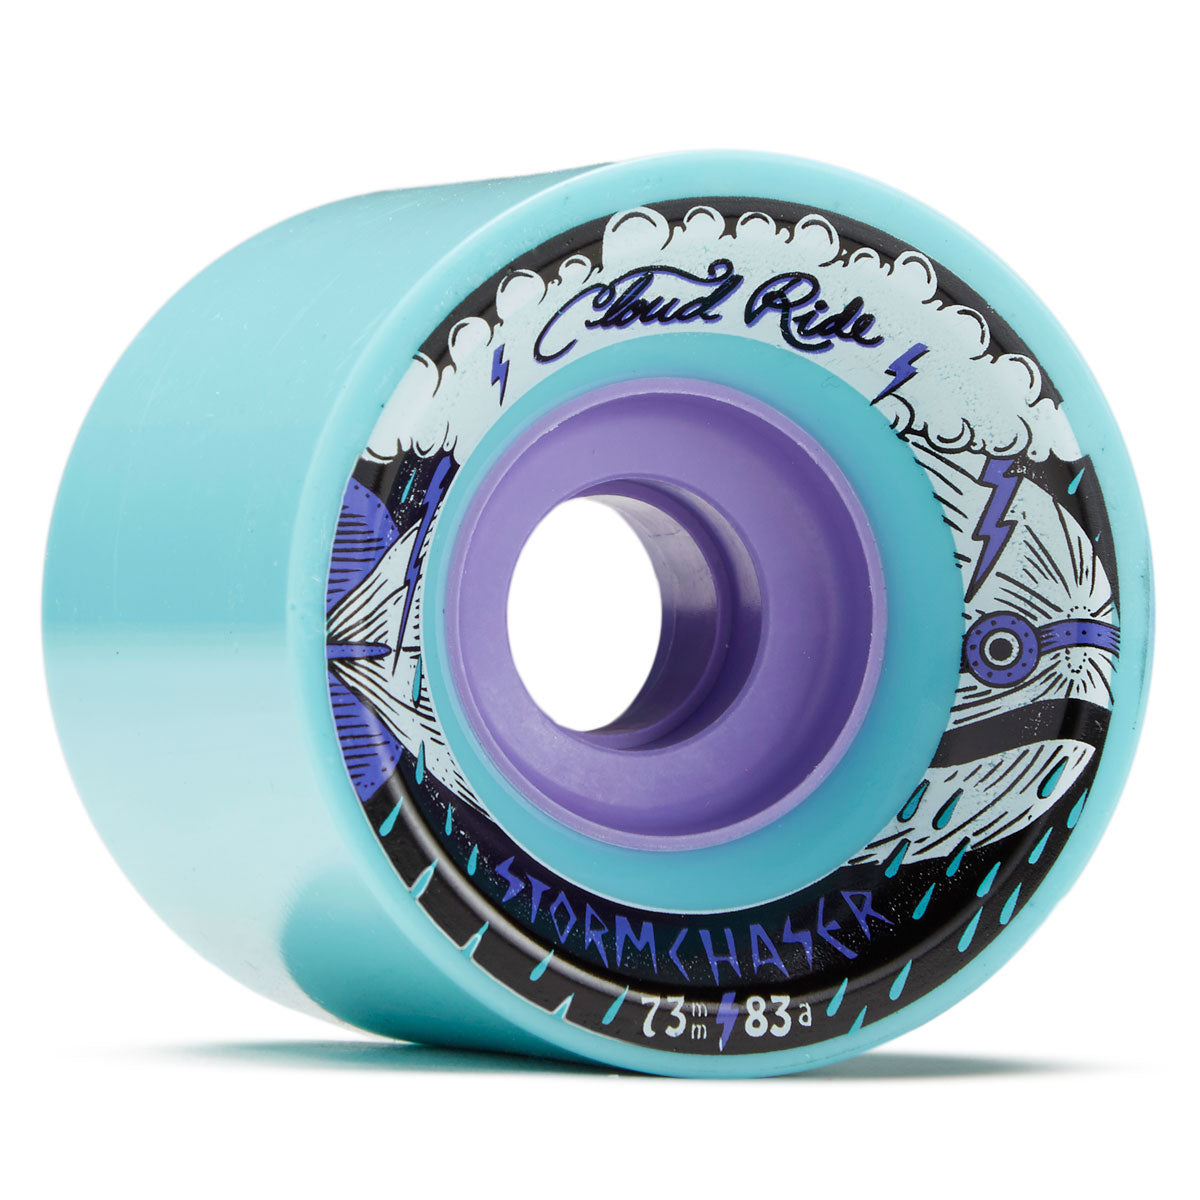 Cloud Ride Storm Chasers 83a Longboard Wheels - Blue - 73mm image 1